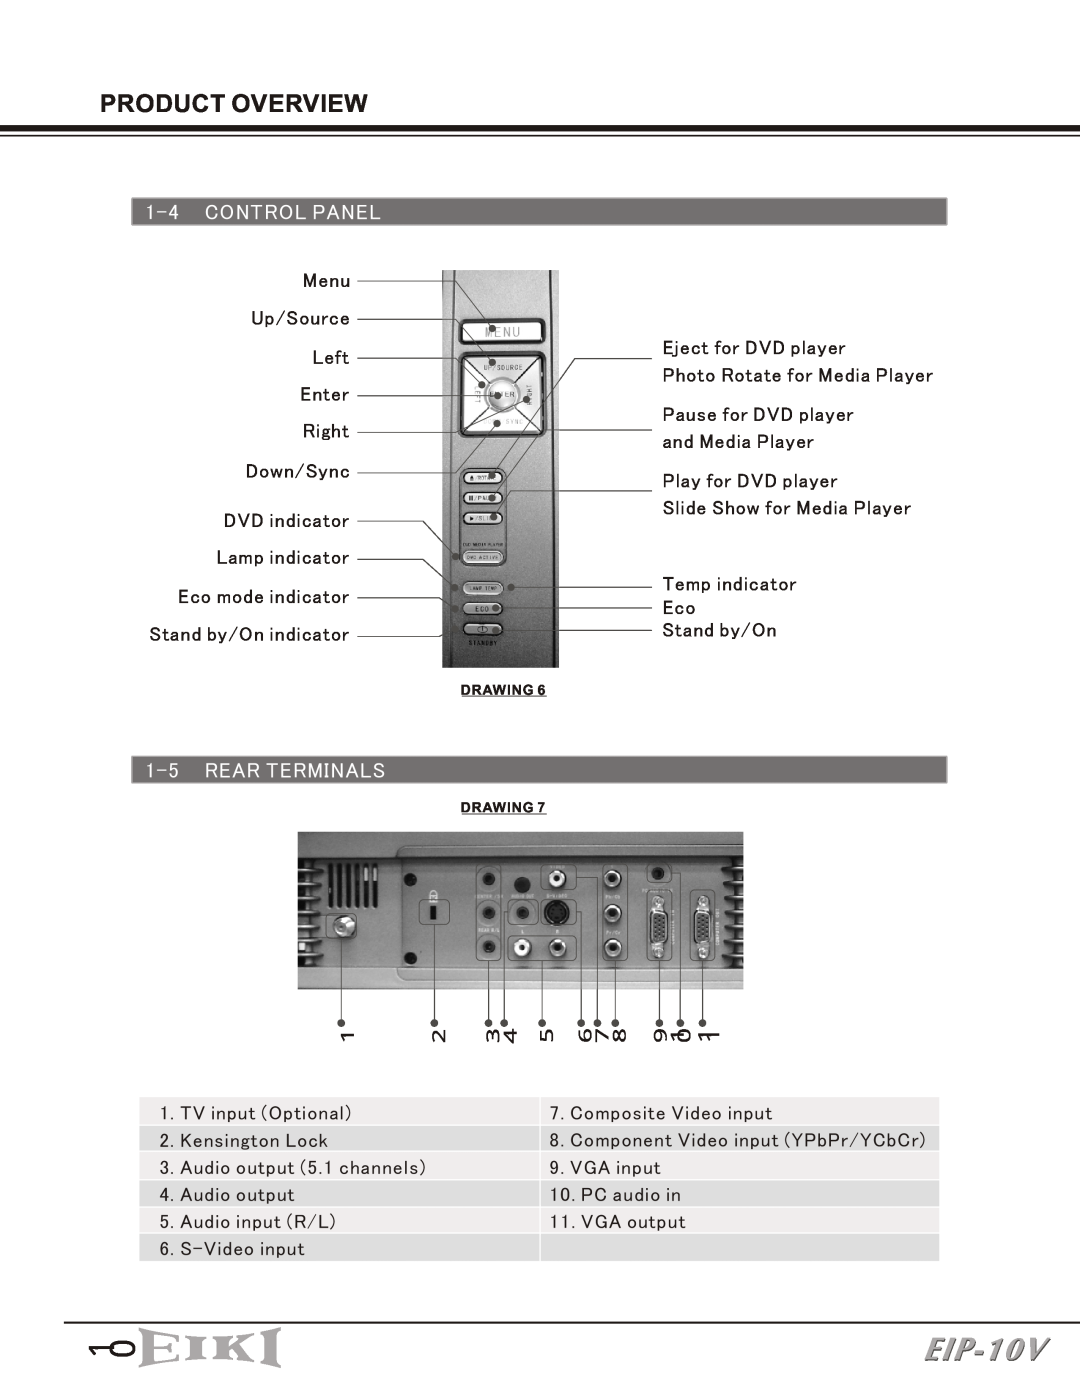 Eiki EIP-10V owner manual Control Panel, Rear Terminals, 뺩 뿄 샺 쉚 쎝 쒿 옶 밐 뫖 밐 밐, Product Overview 